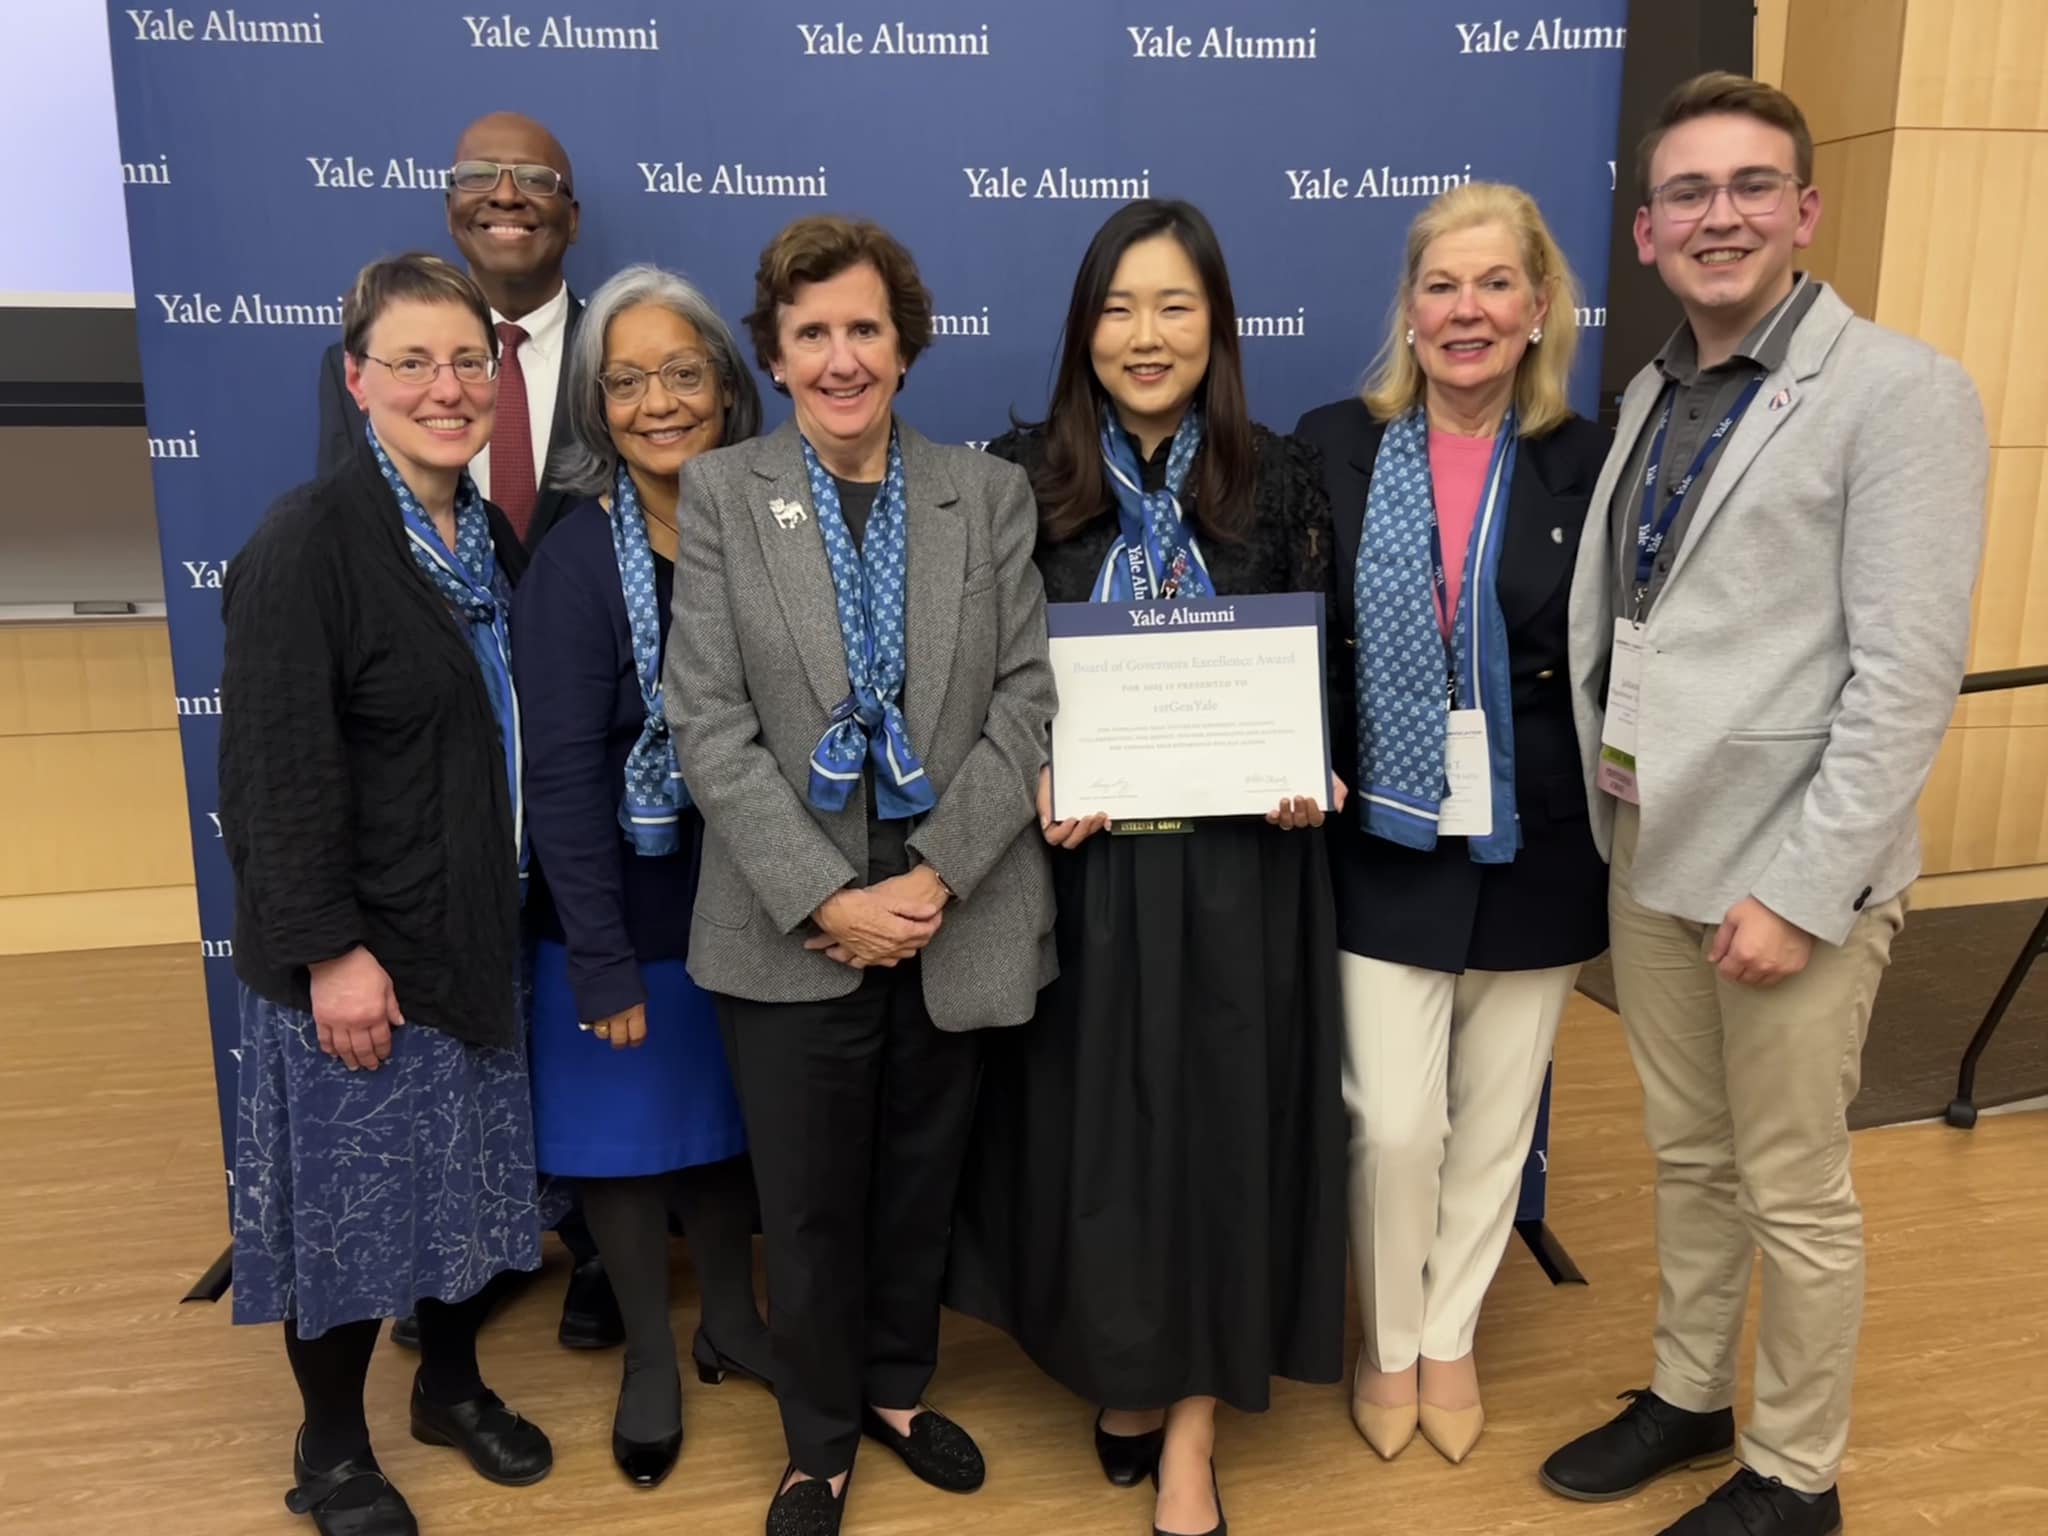 Seven alums stand hold an award certificate and stand in front of a blue banner reading Yale Alumni